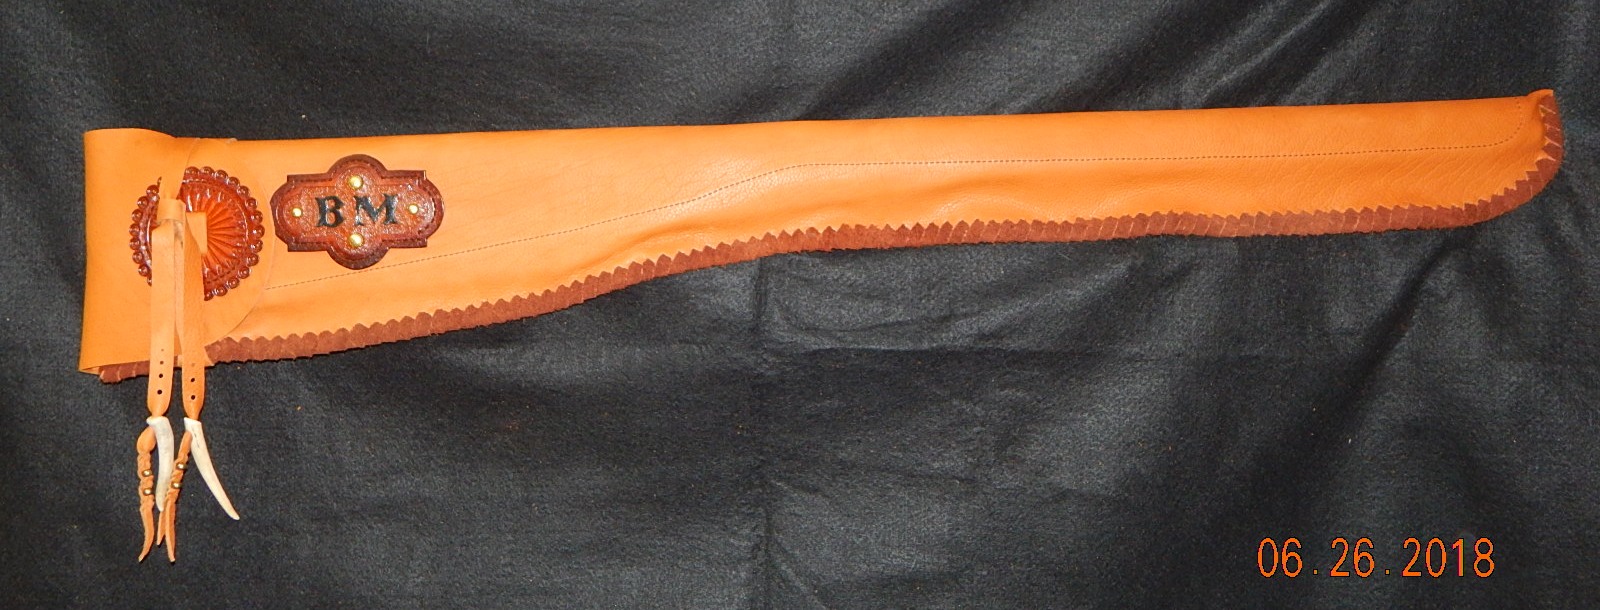 Custom-made Leather Rifle Case: McCarty Design